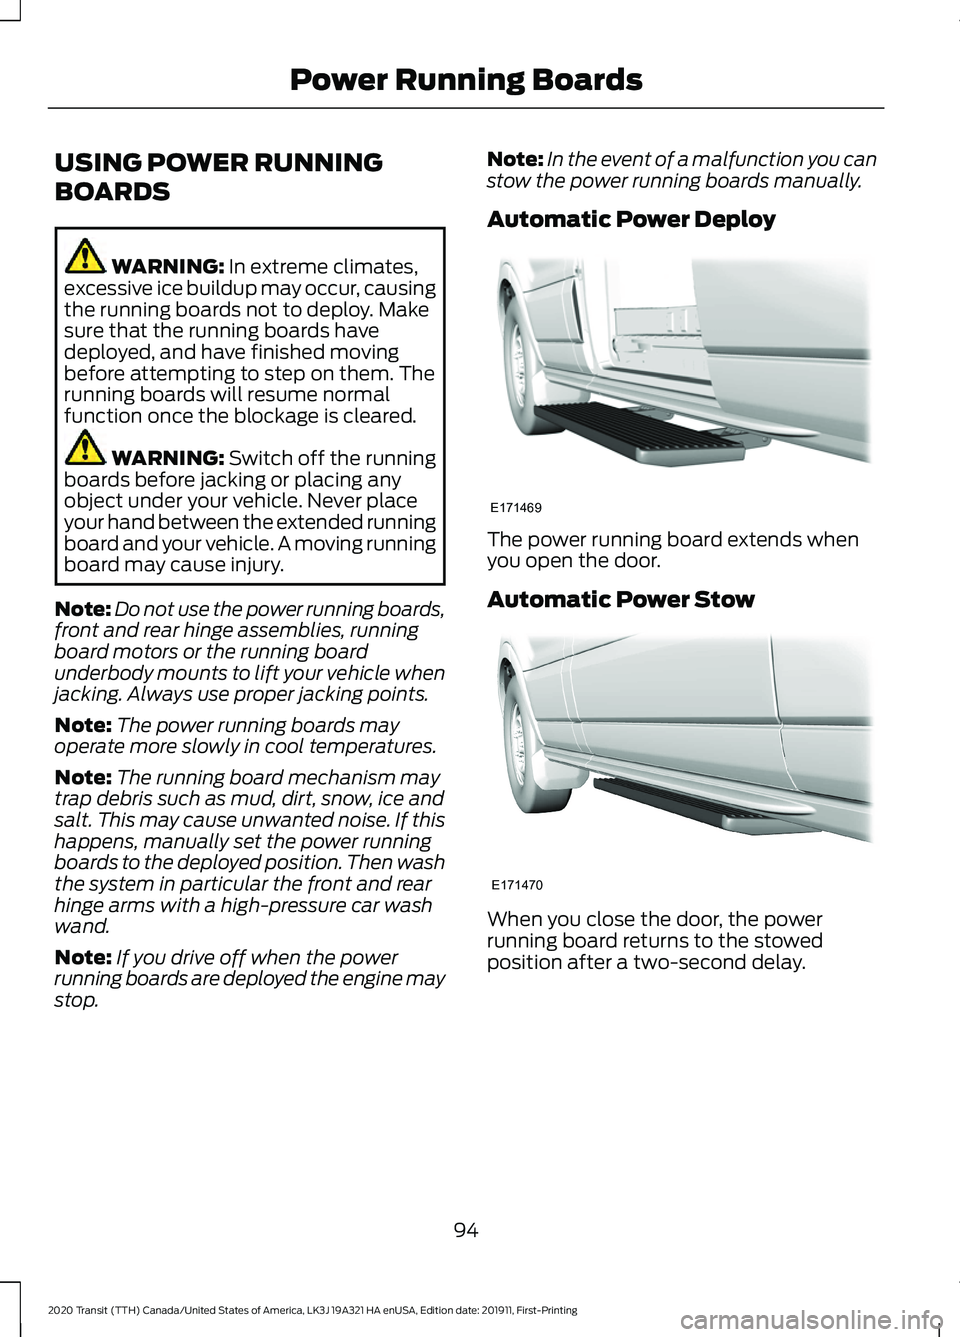 FORD TRANSIT 2020  Owners Manual USING POWER RUNNING
BOARDS
WARNING: In extreme climates,
excessive ice buildup may occur, causing
the running boards not to deploy. Make
sure that the running boards have
deployed, and have finished m